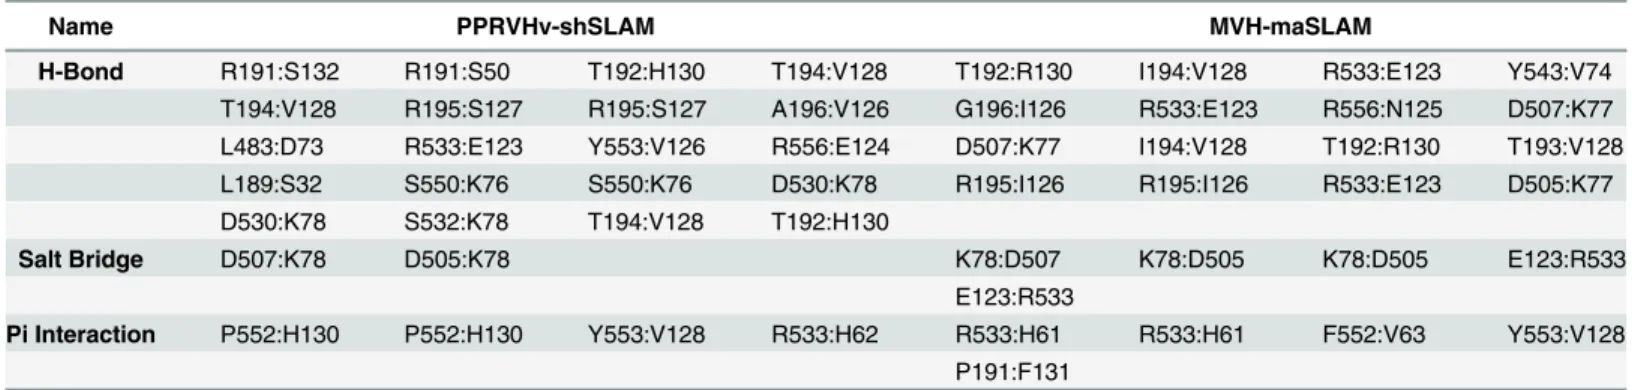 Table 4. Interface residues comparison between PPRVHv-shSLAM and MVH-maSLAM complex.